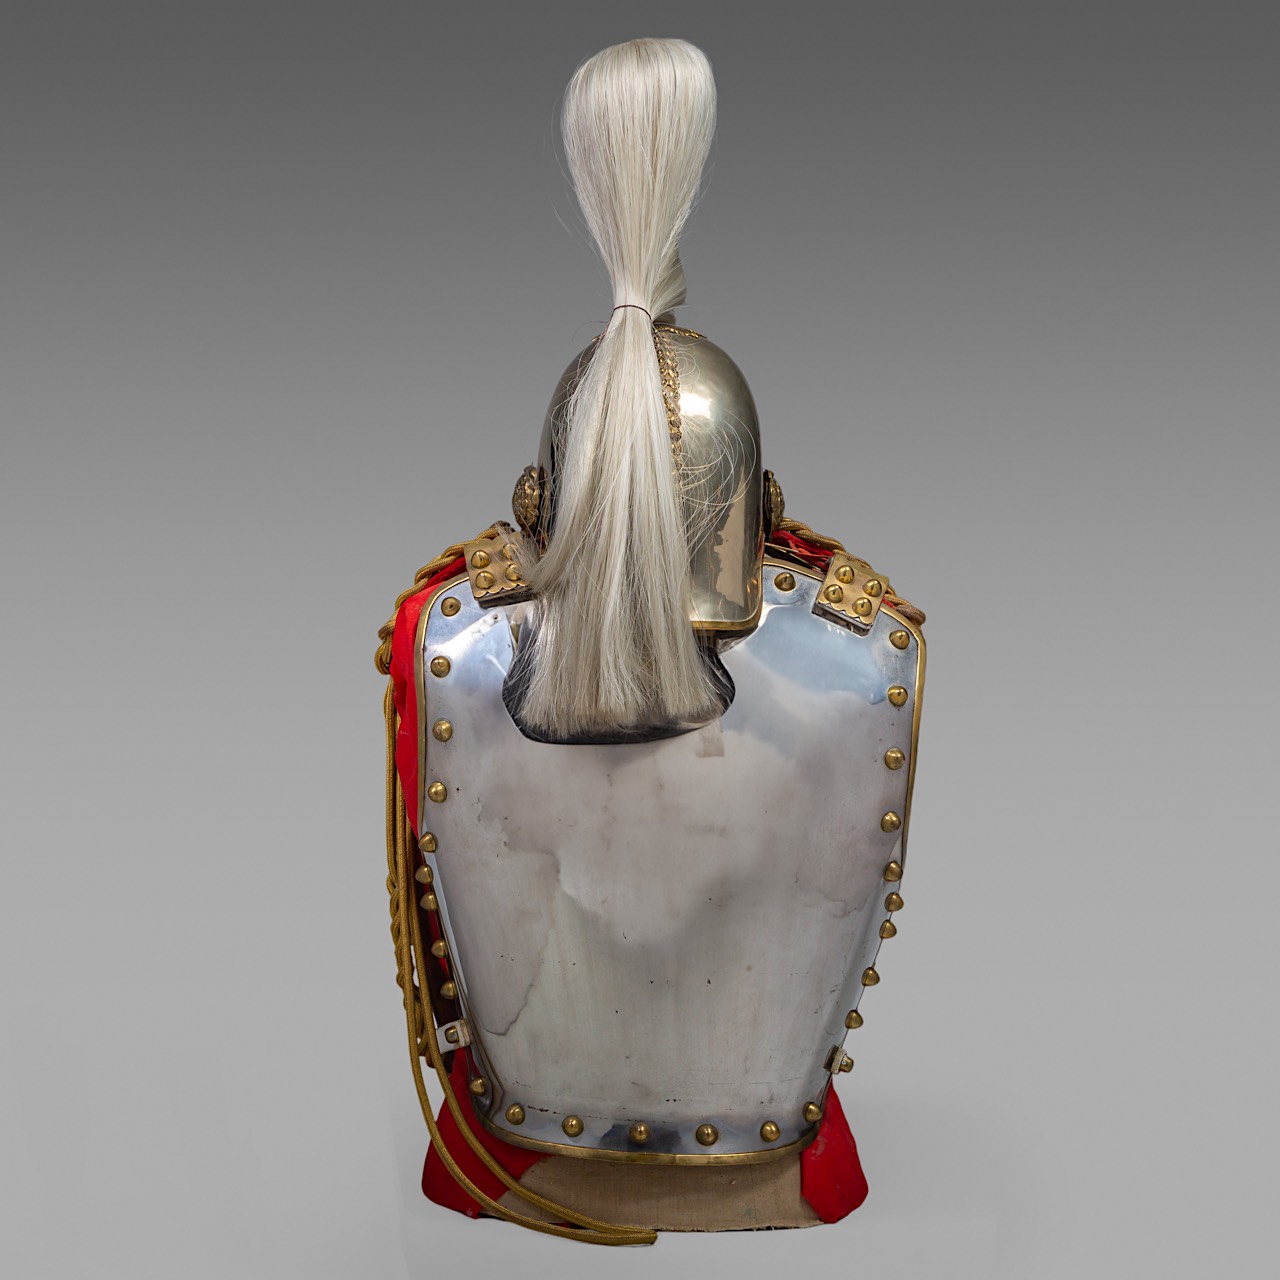 cuirass and helmet of the Royal Horse guards, metal and brass,1952 (Eliabeth II) 88 x 36 x 44 cm. (3 - Image 4 of 6